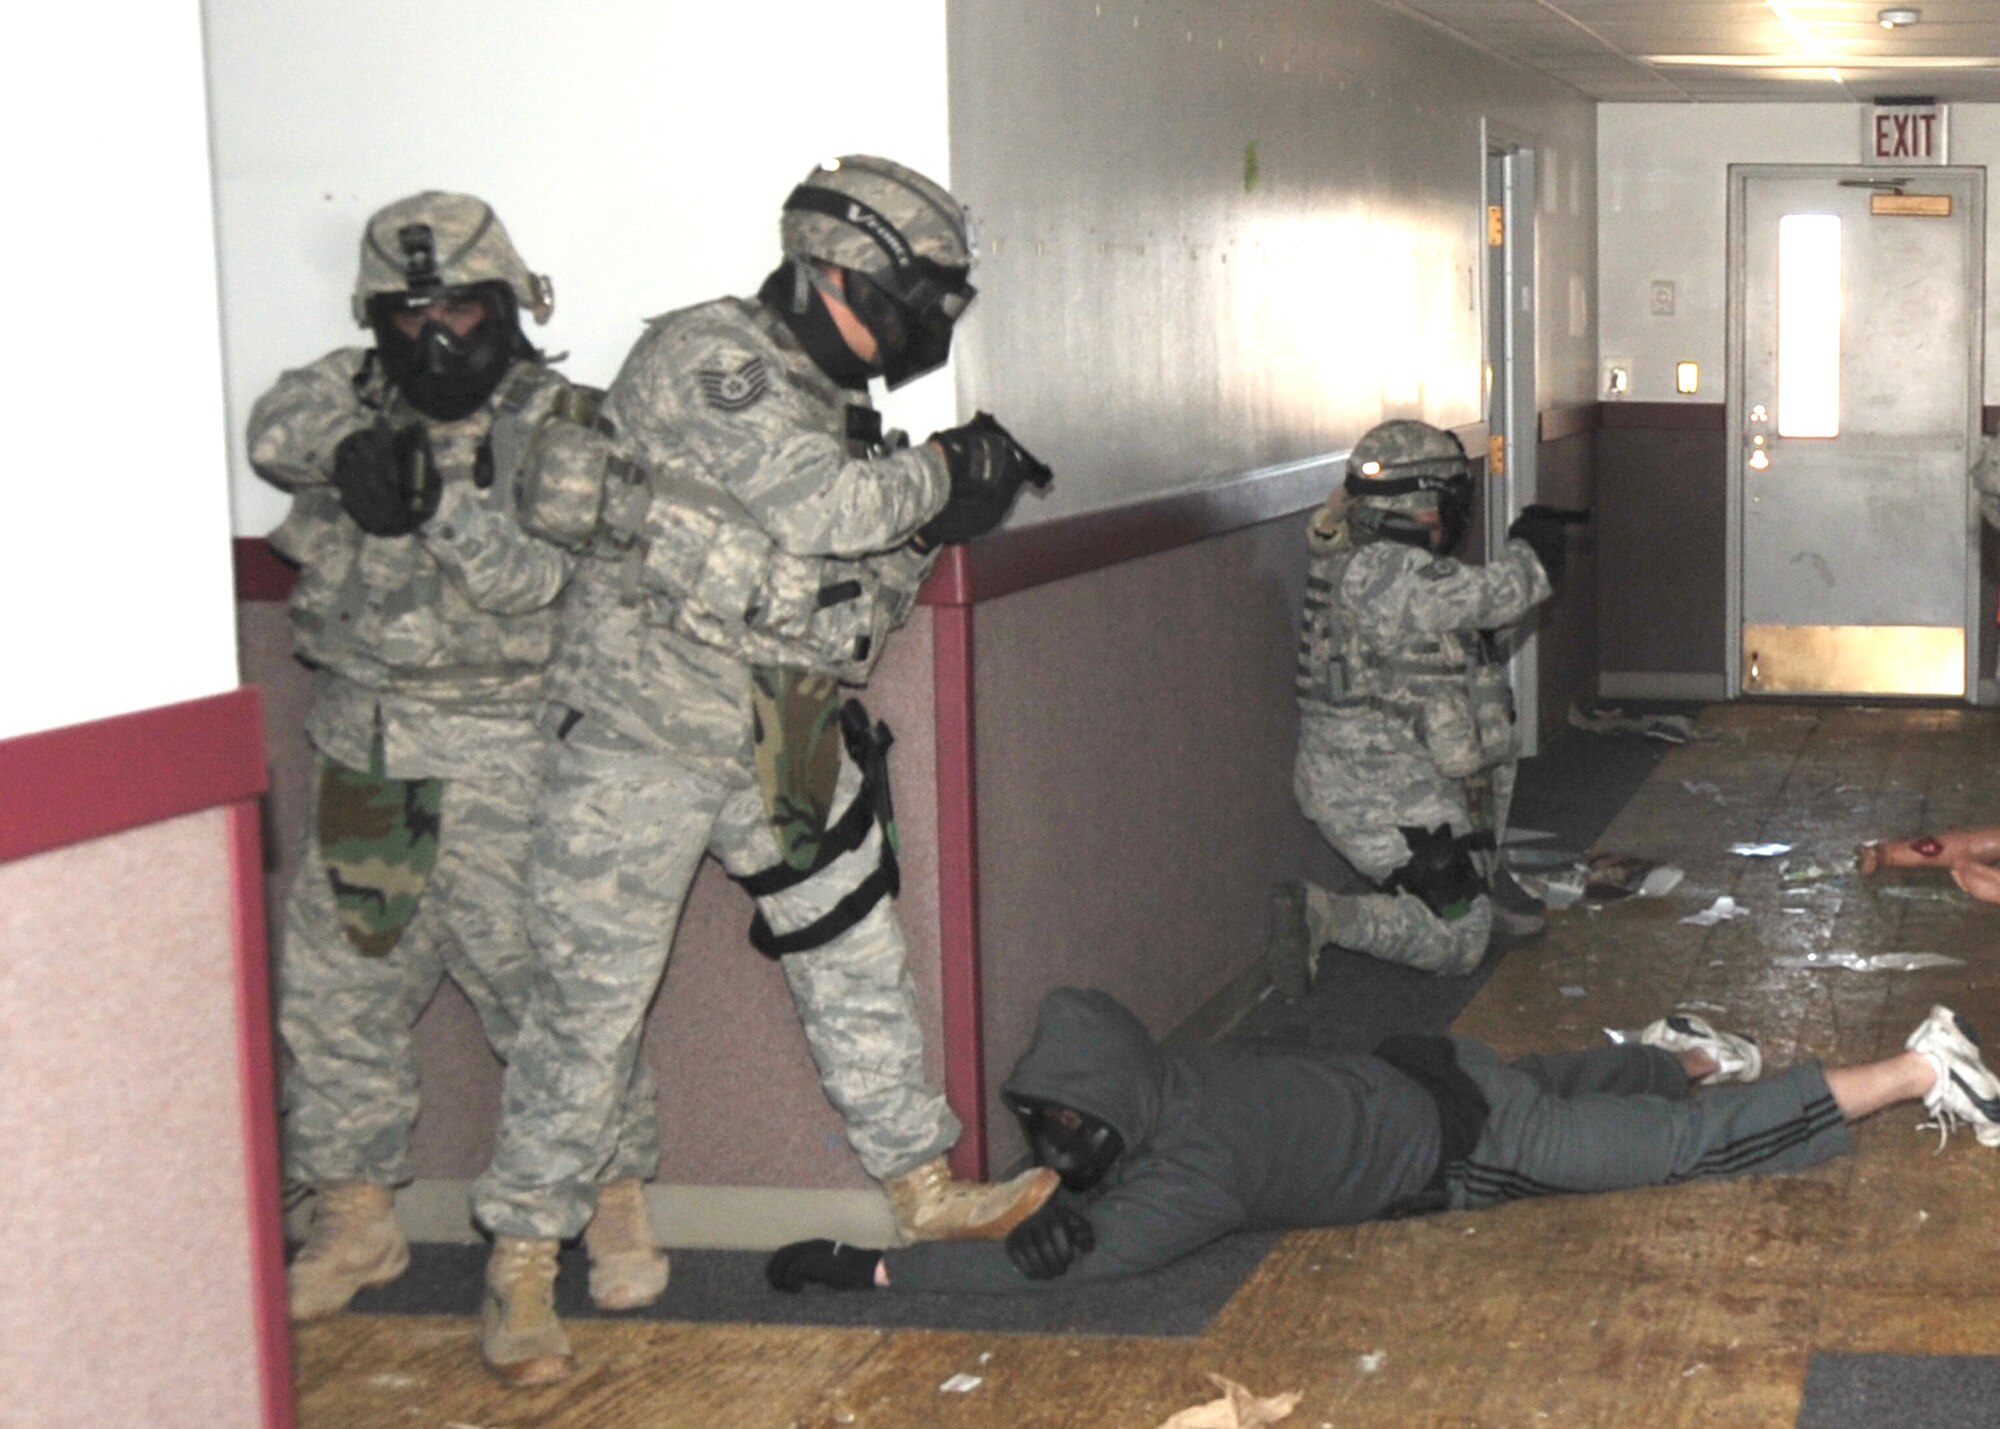 Security Forces cover a hallway after disarming the “shooter” during an active-shooter scenario.  U.S. Air Force Photo by Dennis Carlson.